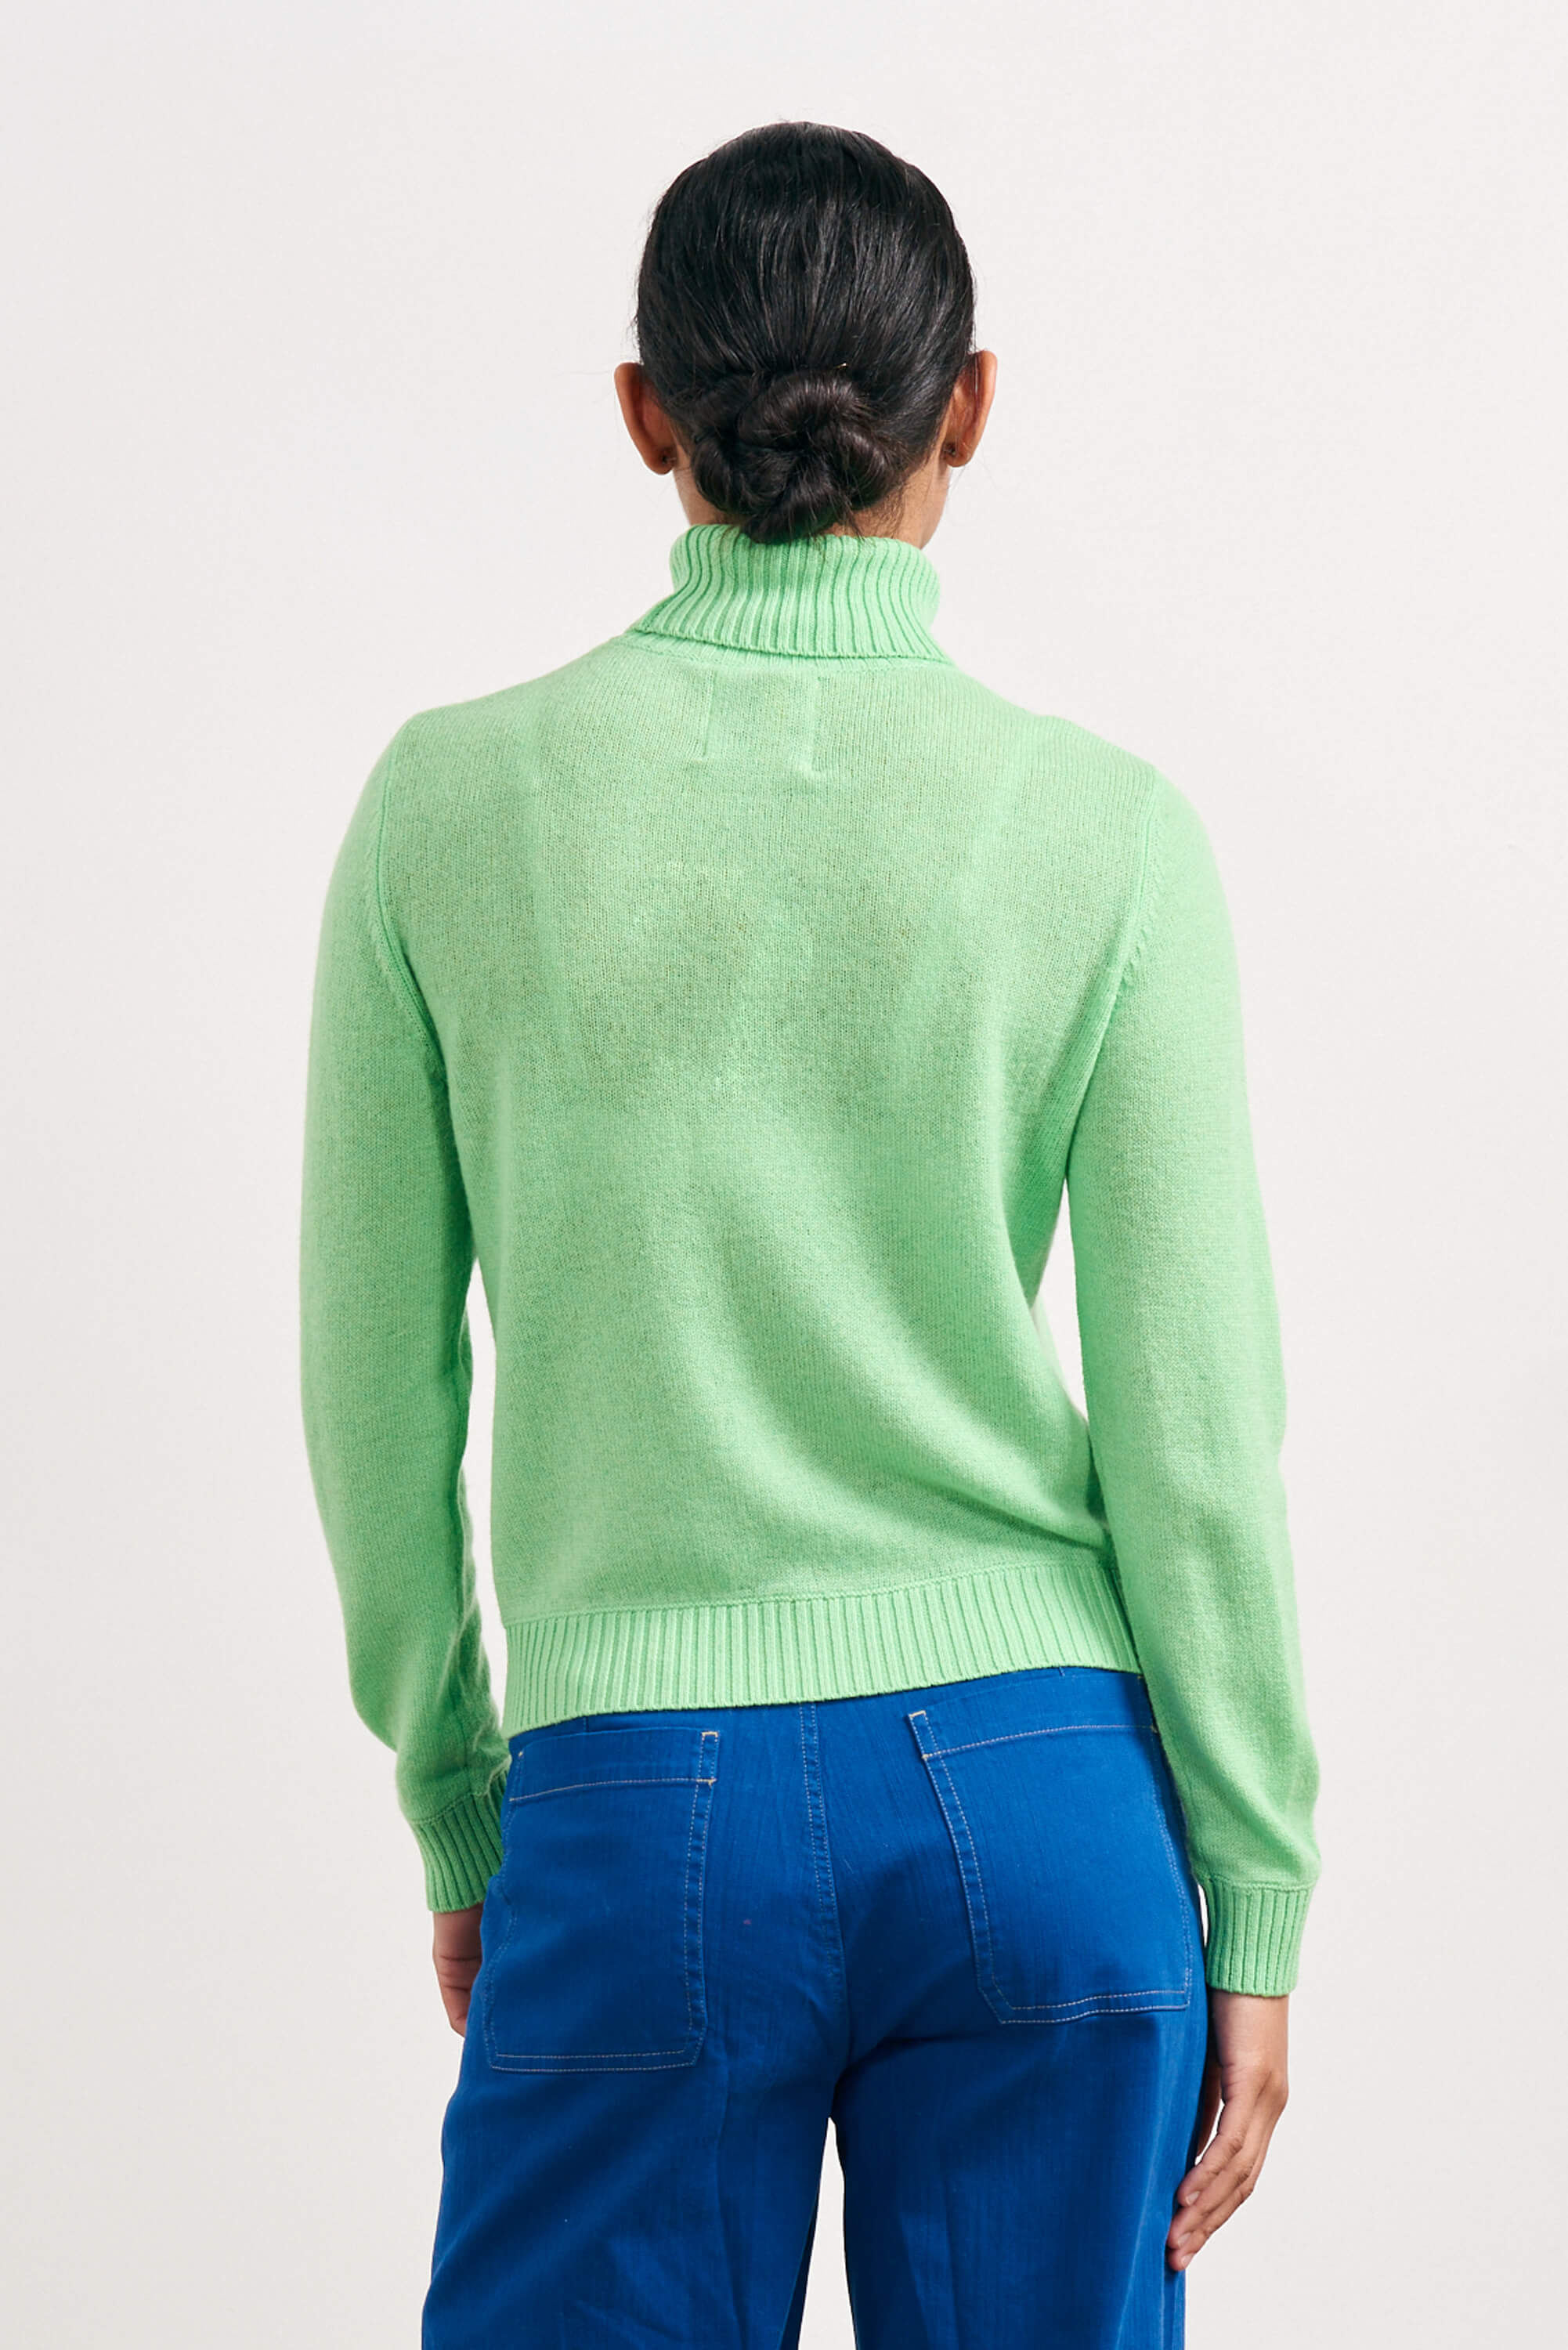 Brown haired female model wearing Jumper1234 lightweight cashmere roll neck in apple green facing away from the camera